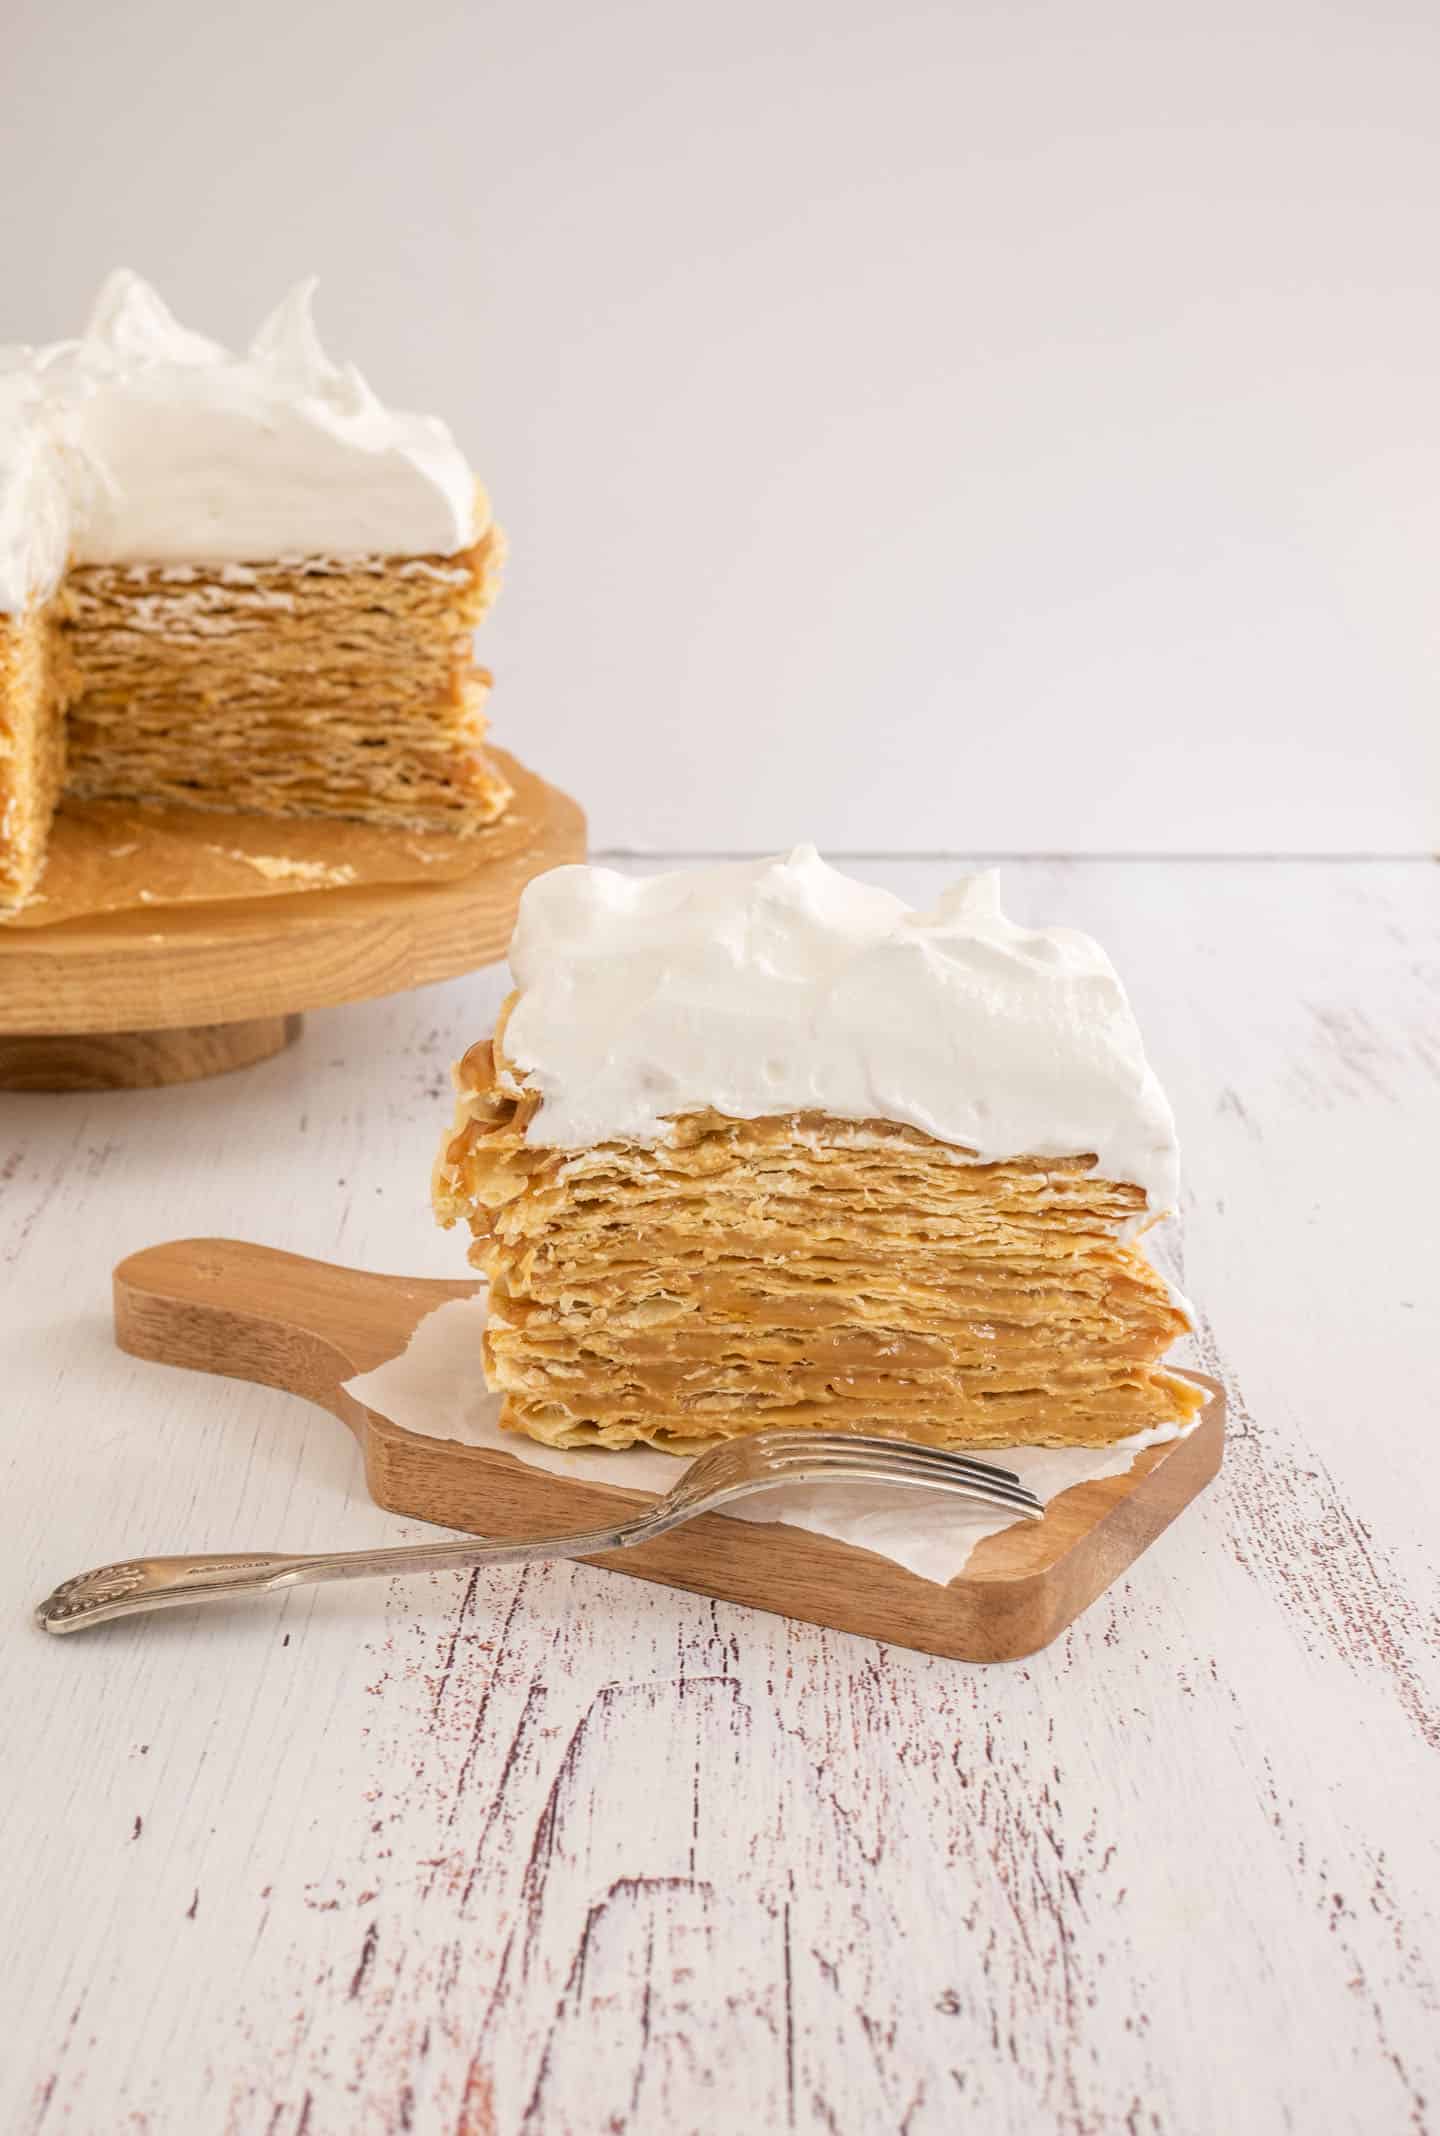 Slice of this dessert with lots of dulce de leche and Swiss meringue